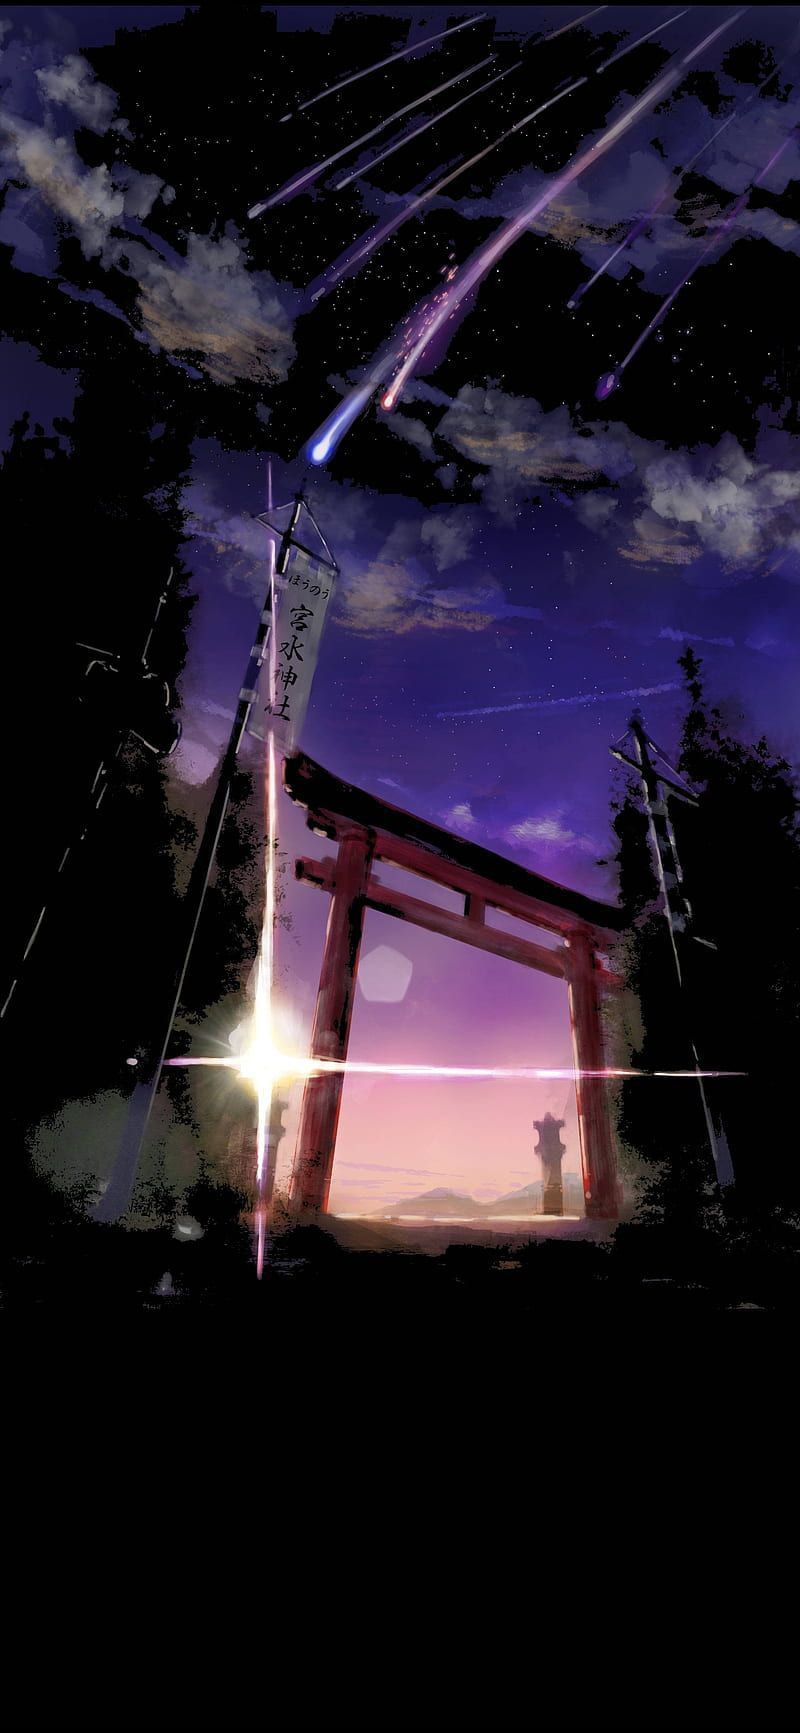 A red torii gate with a paper lantern hanging from it. A shooting star streaks across the sky. - Night, Japanese, Japan